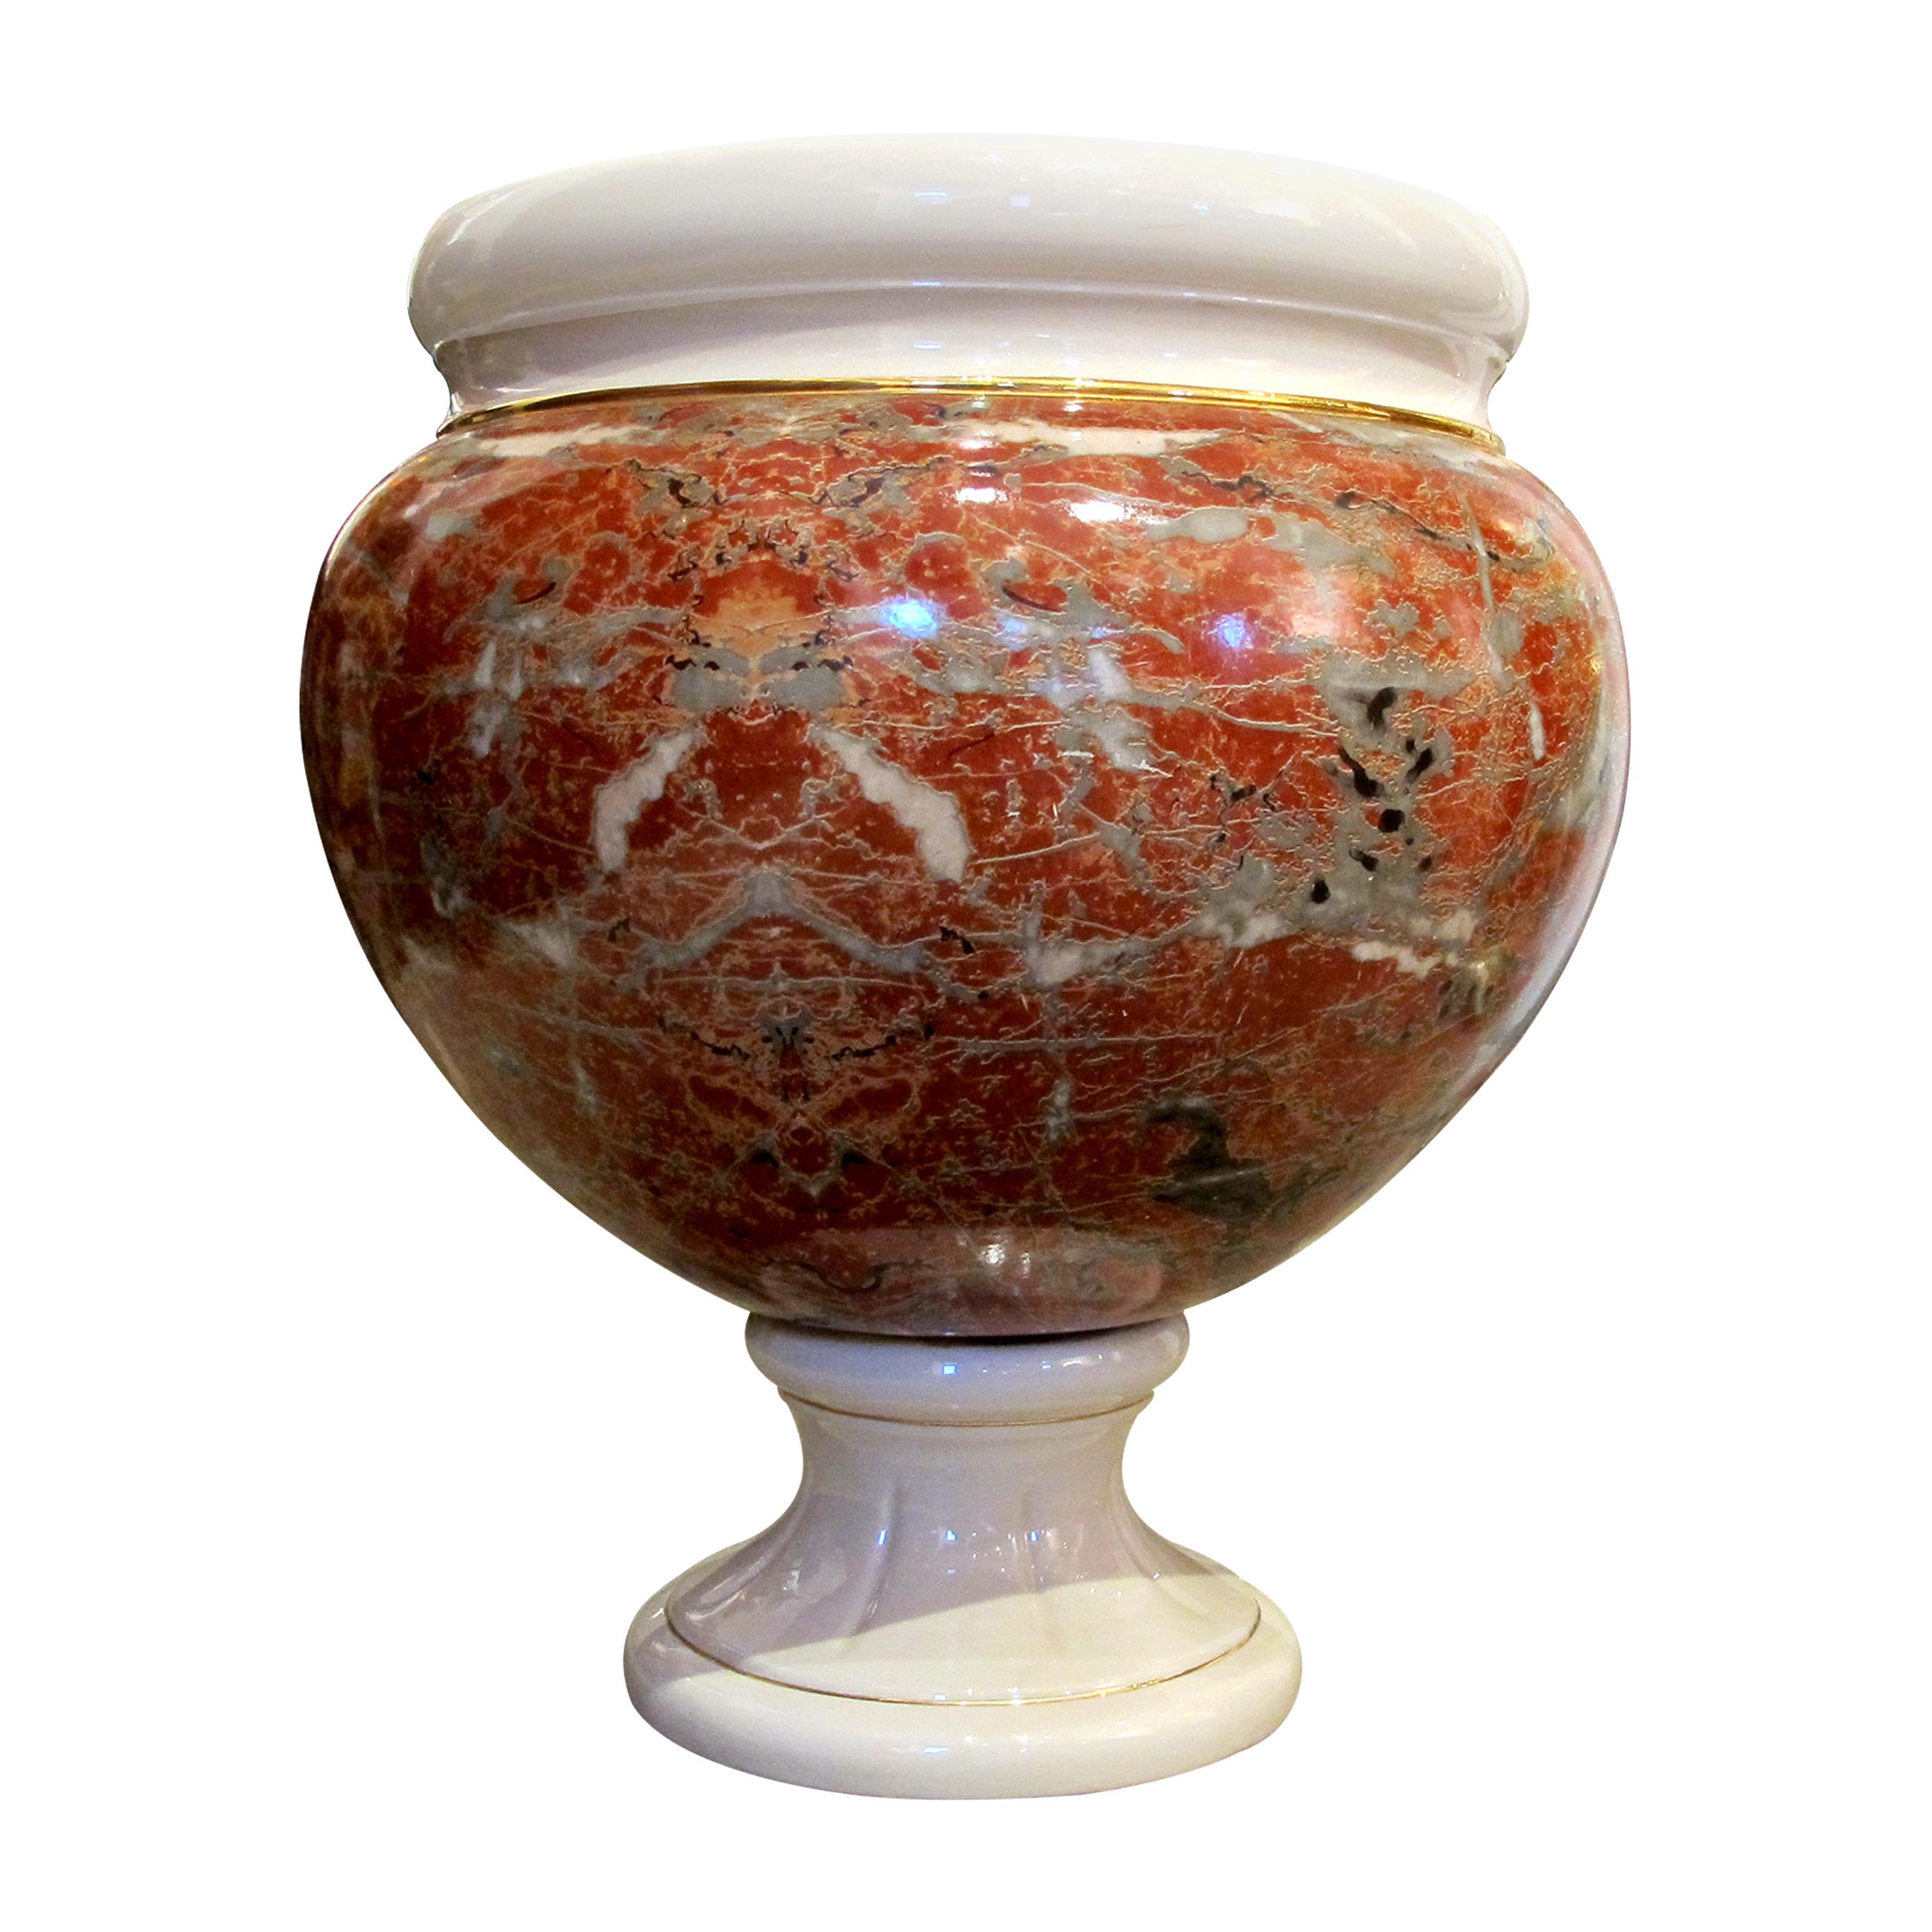 Tommaso Barbi's signature style, characterized by a harmonious fusion of traditional craftsmanship and contemporary aesthetics, is palpable in every curve and contour of this exceptional piece. This urn was commissioned by the Ceramiche B and